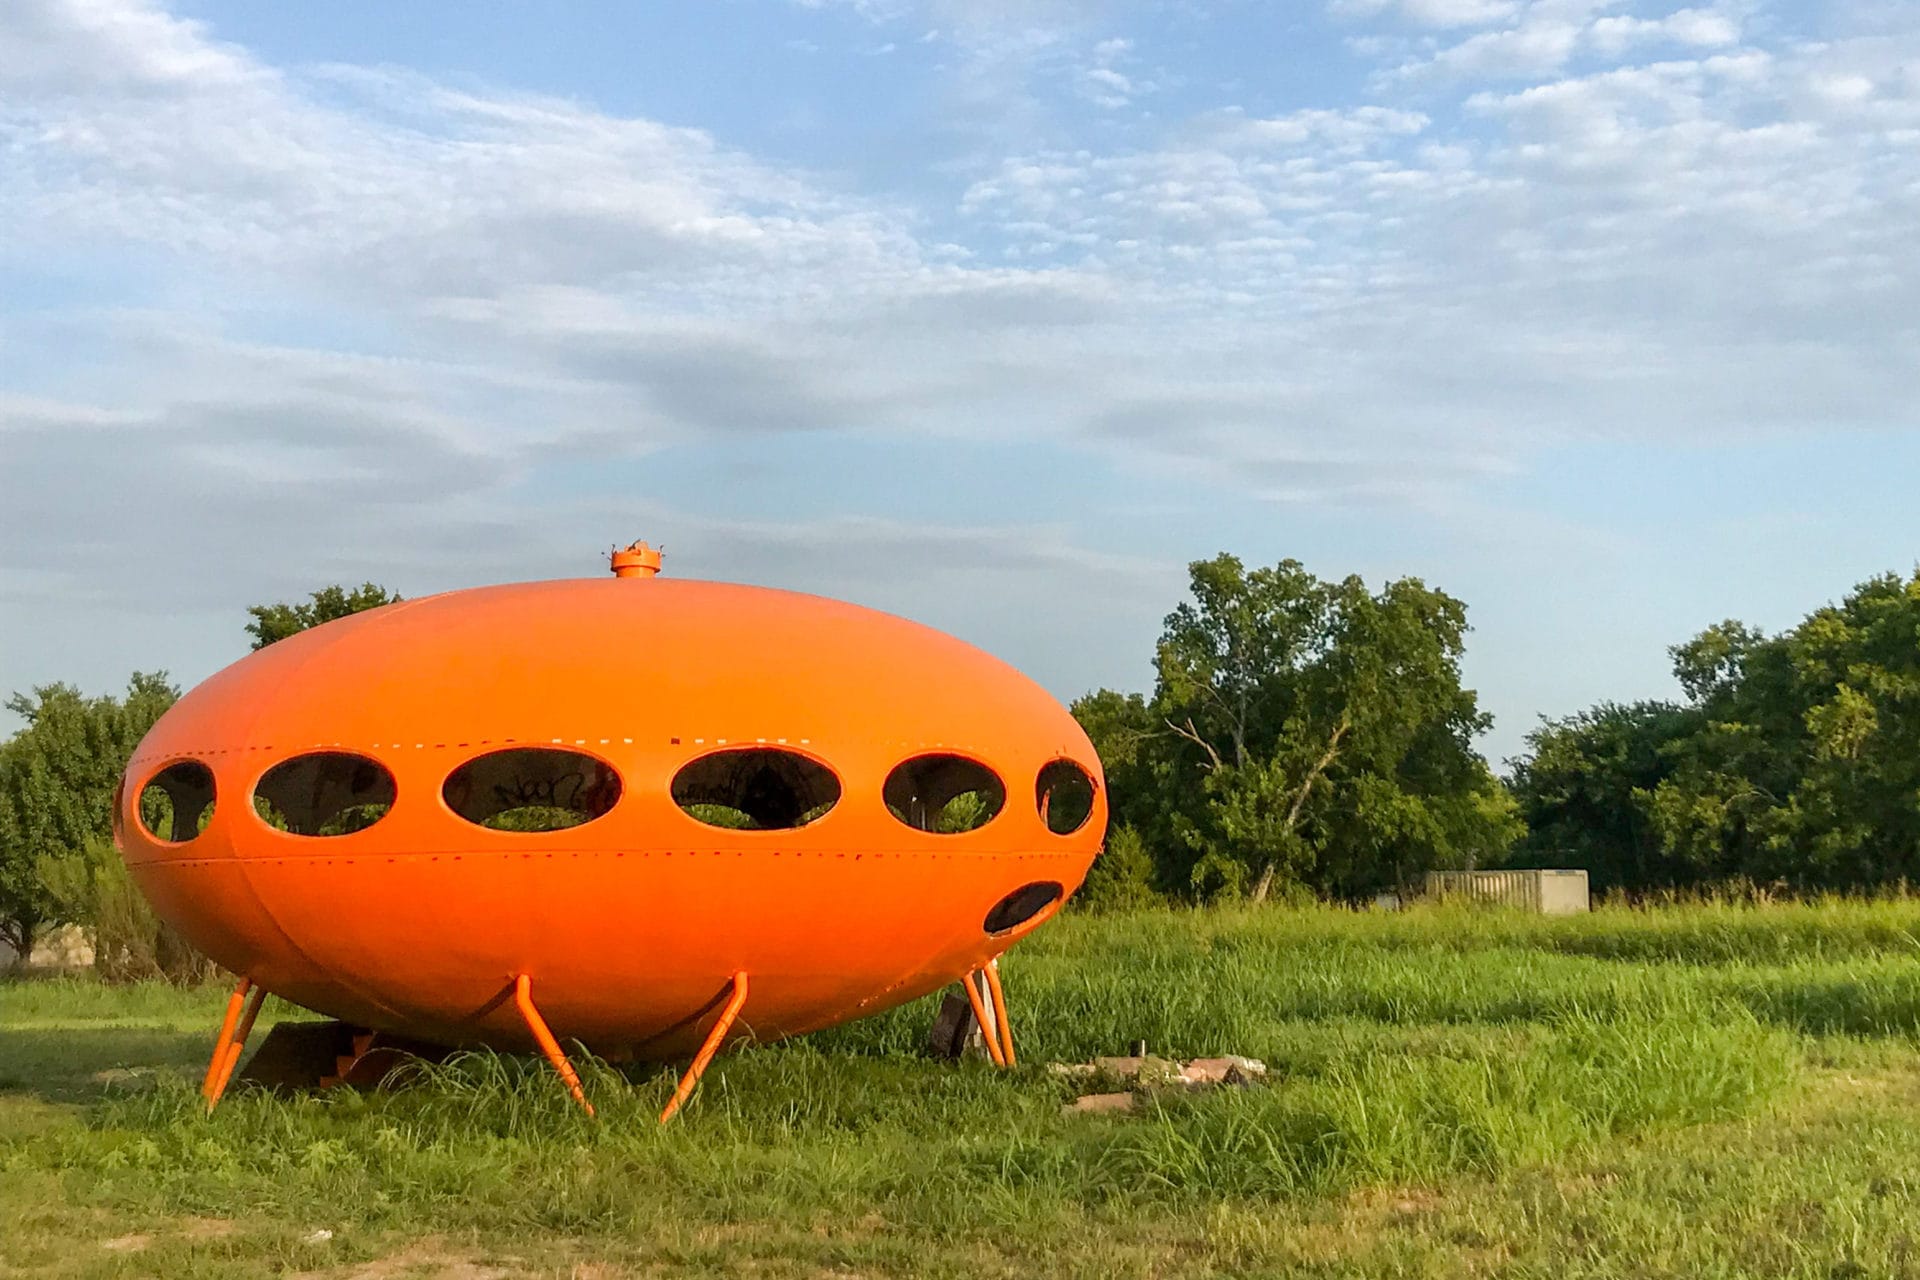 Sleep in a spaceship: Futuro houses offer 1960s nostalgia with a side of  novelty - Roadtrippers